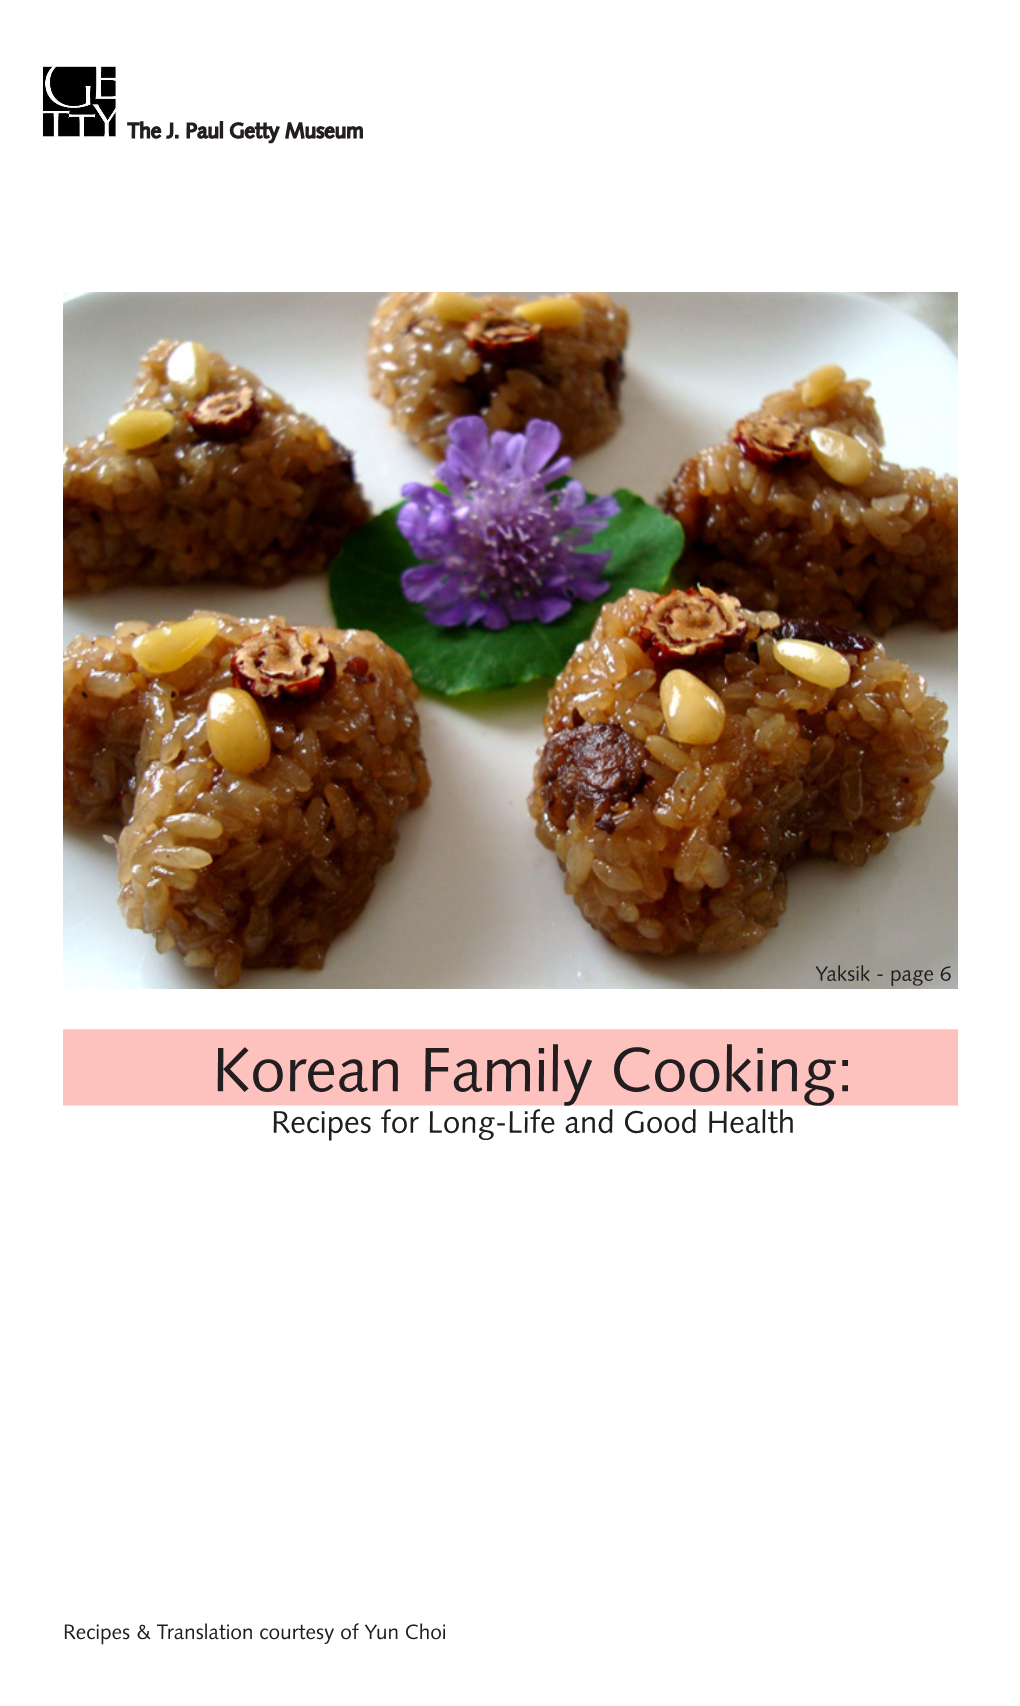 Korean Family Cooking: Recipes for Long-Life and Good Health